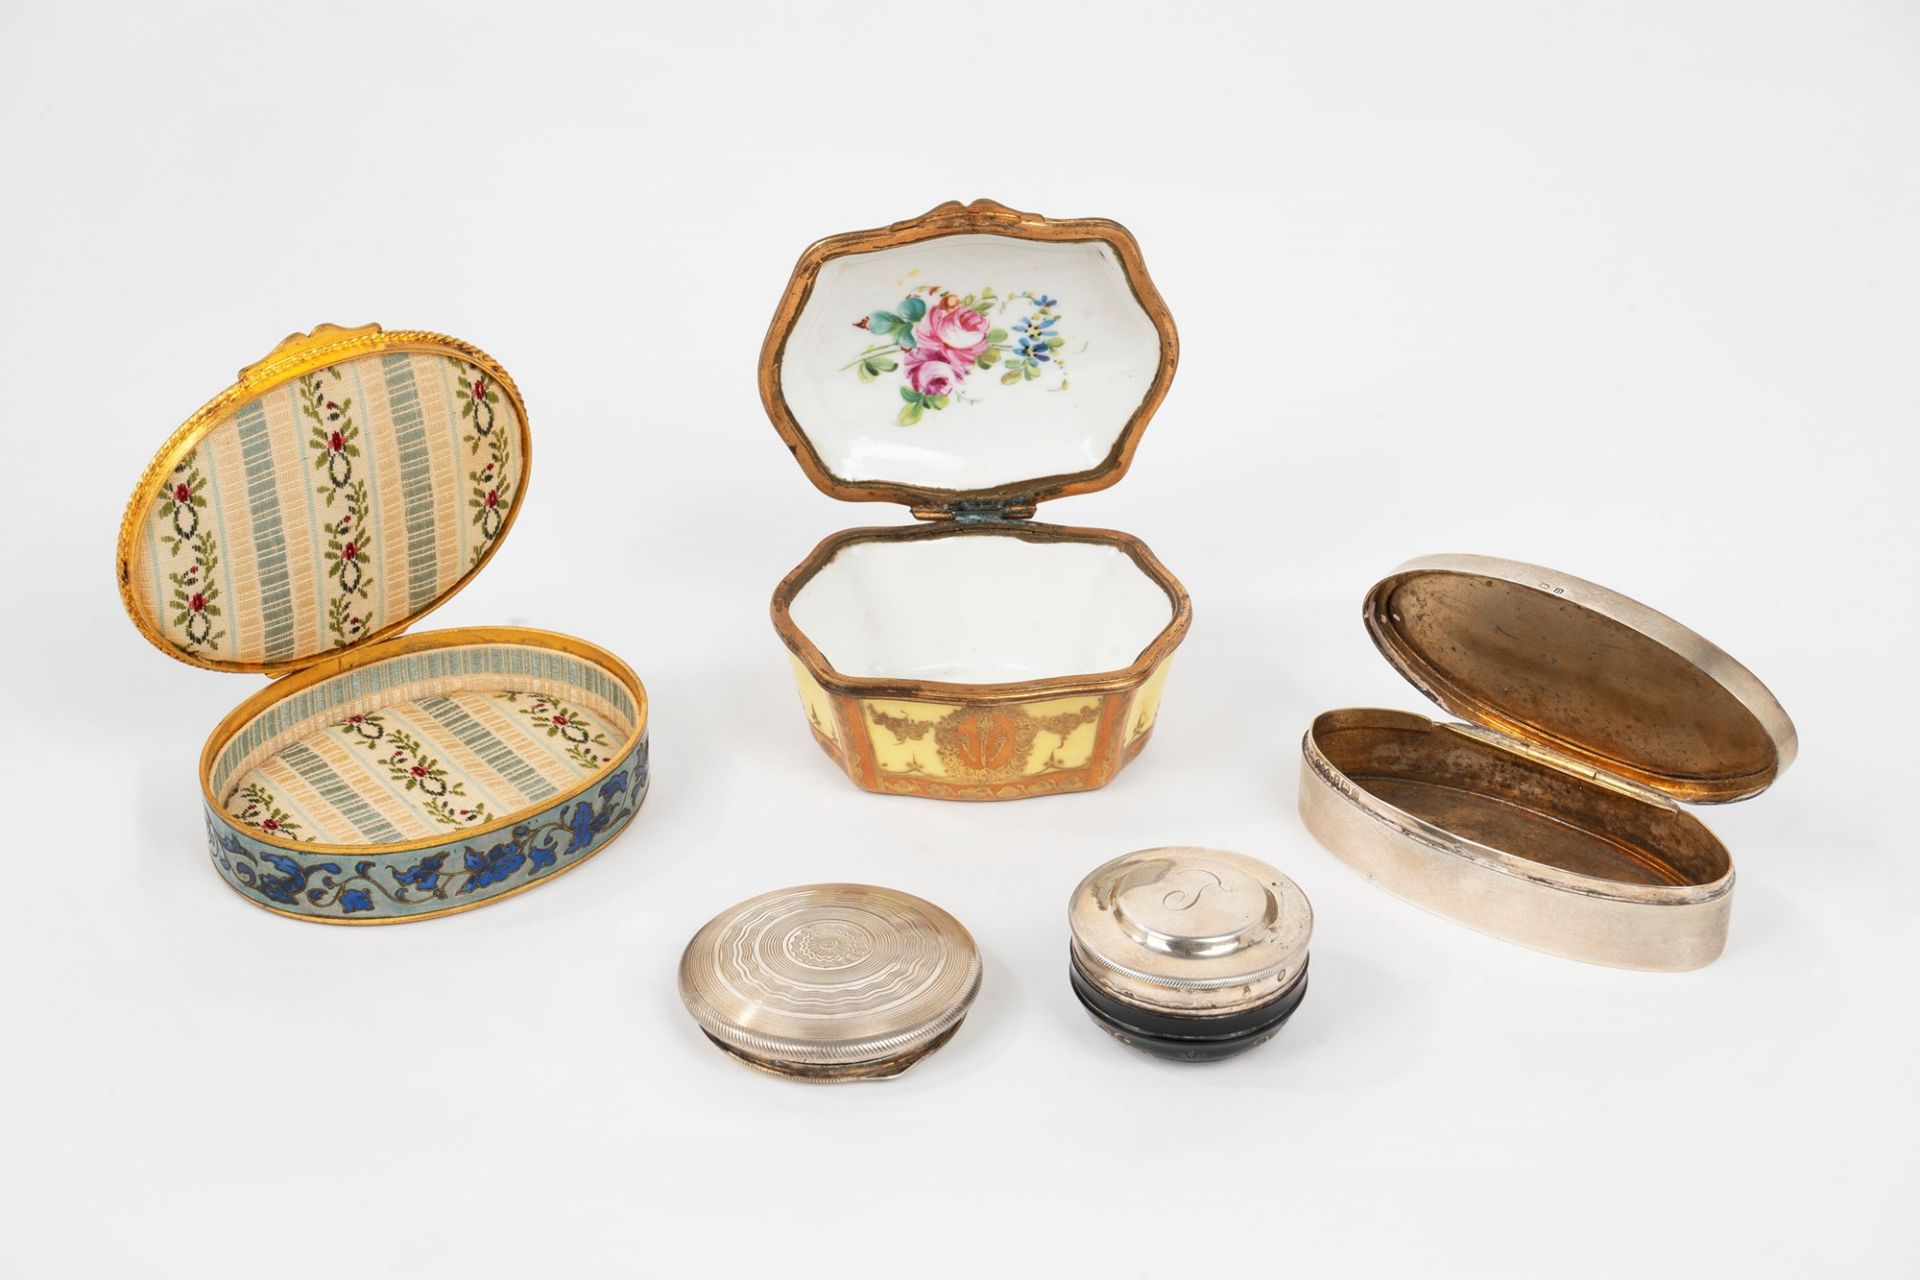 Lot consisting of three boxes and a powder compact, 19th-20th centuries - Image 3 of 6